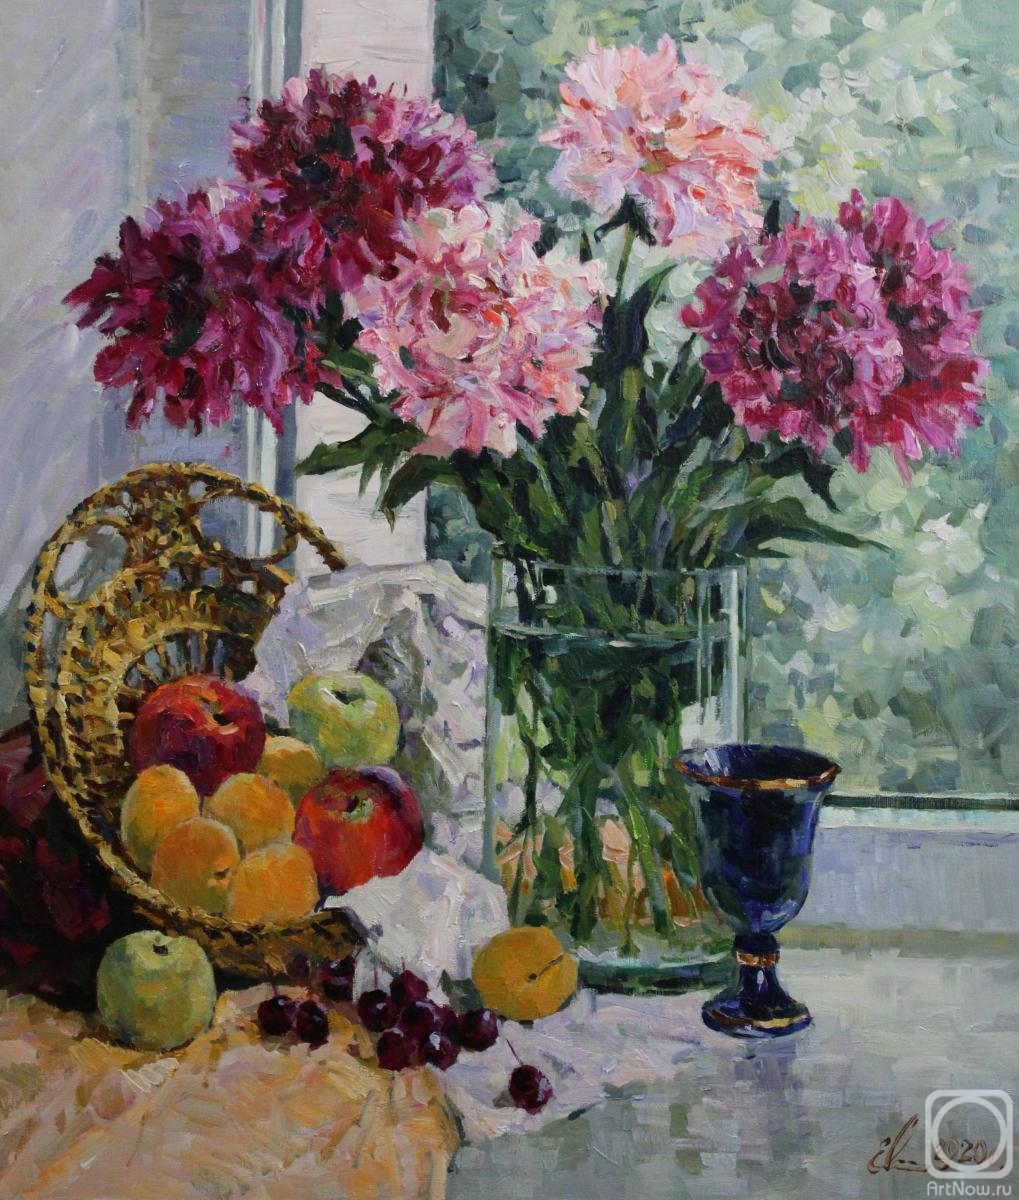 Malykh Evgeny. Peonies and fruits